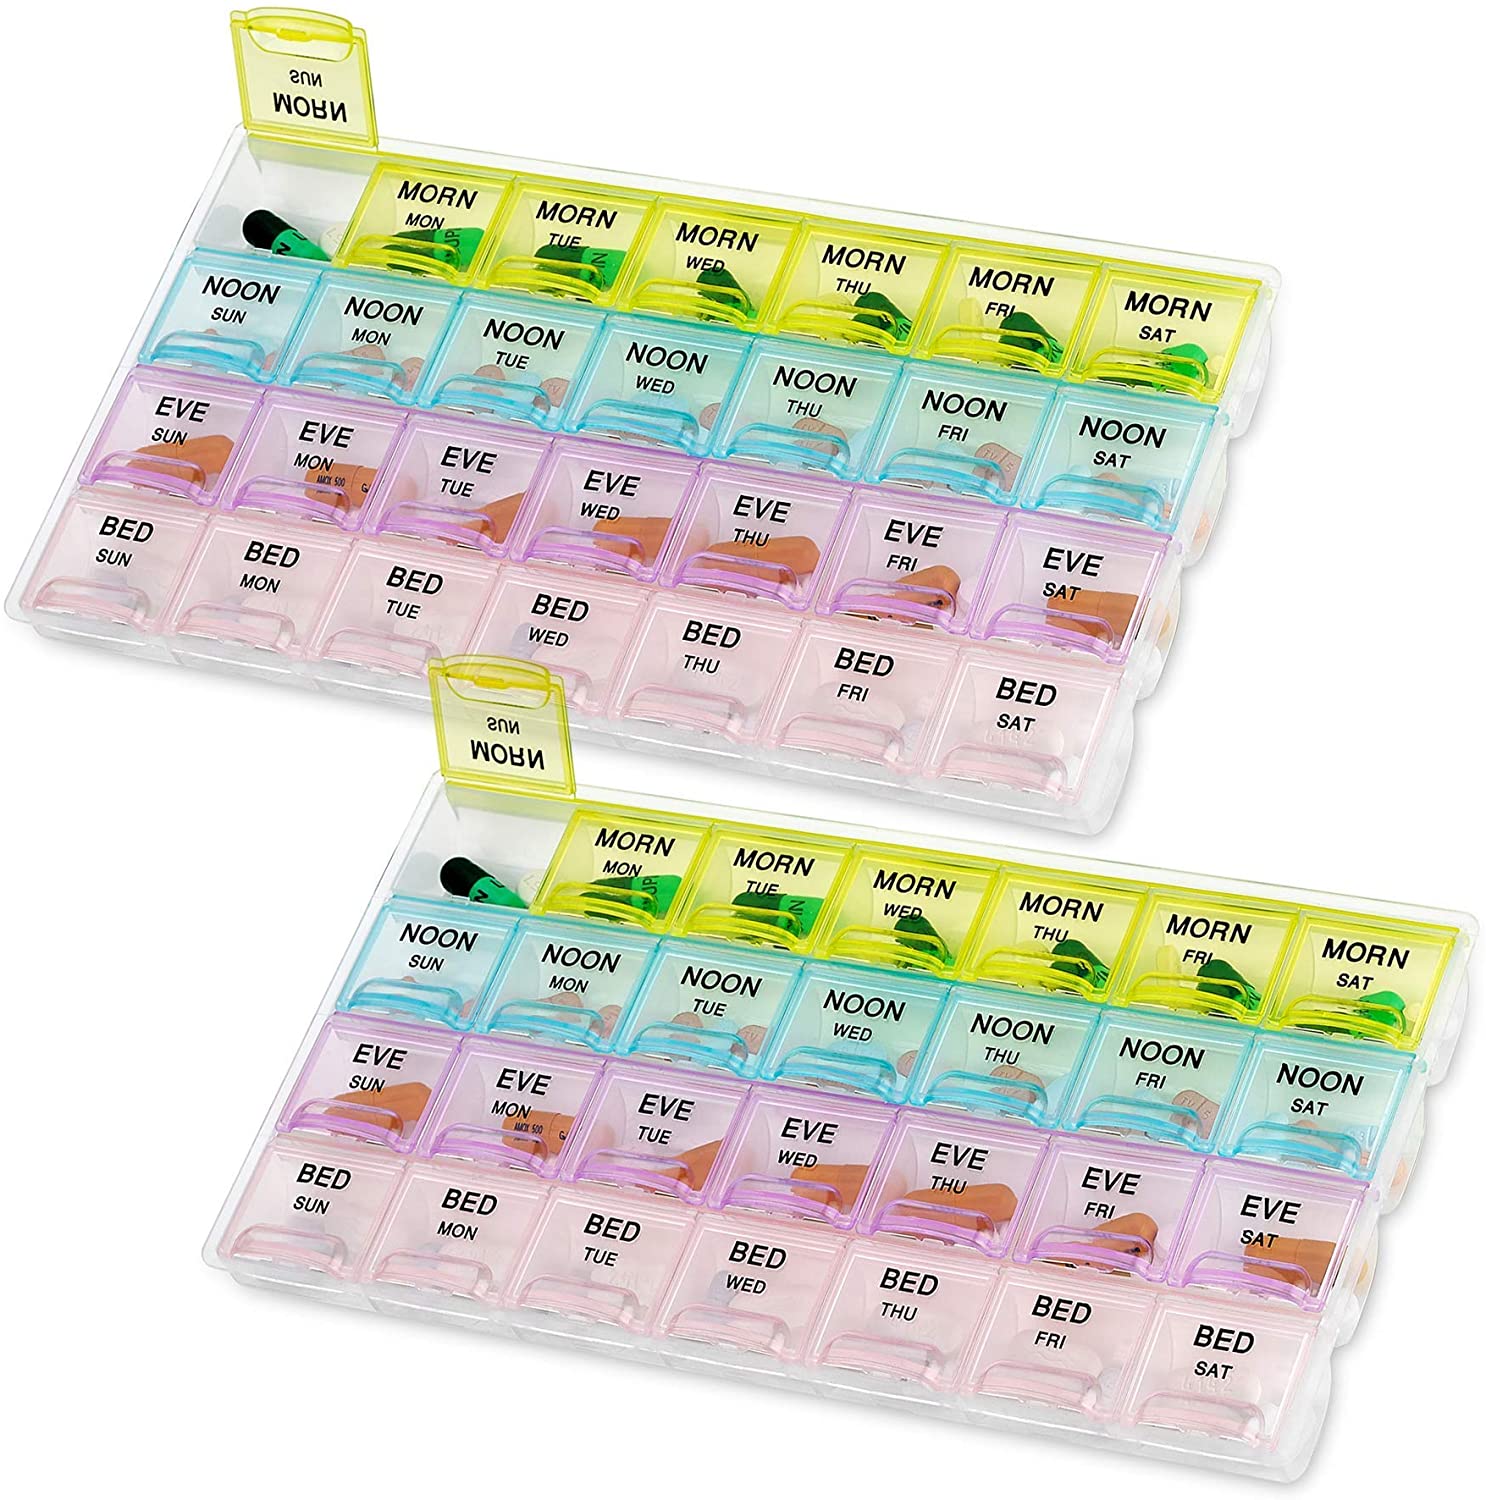 https://carismedic.com/wp-content/uploads/imported/Pill-Organizers-2-Pack-Large-Pill-Organizer-with-Weekly-and-Daily-4-Times-A-Day-Compartments-for-Morning-Noon-Even-B08NL61CR2.jpg